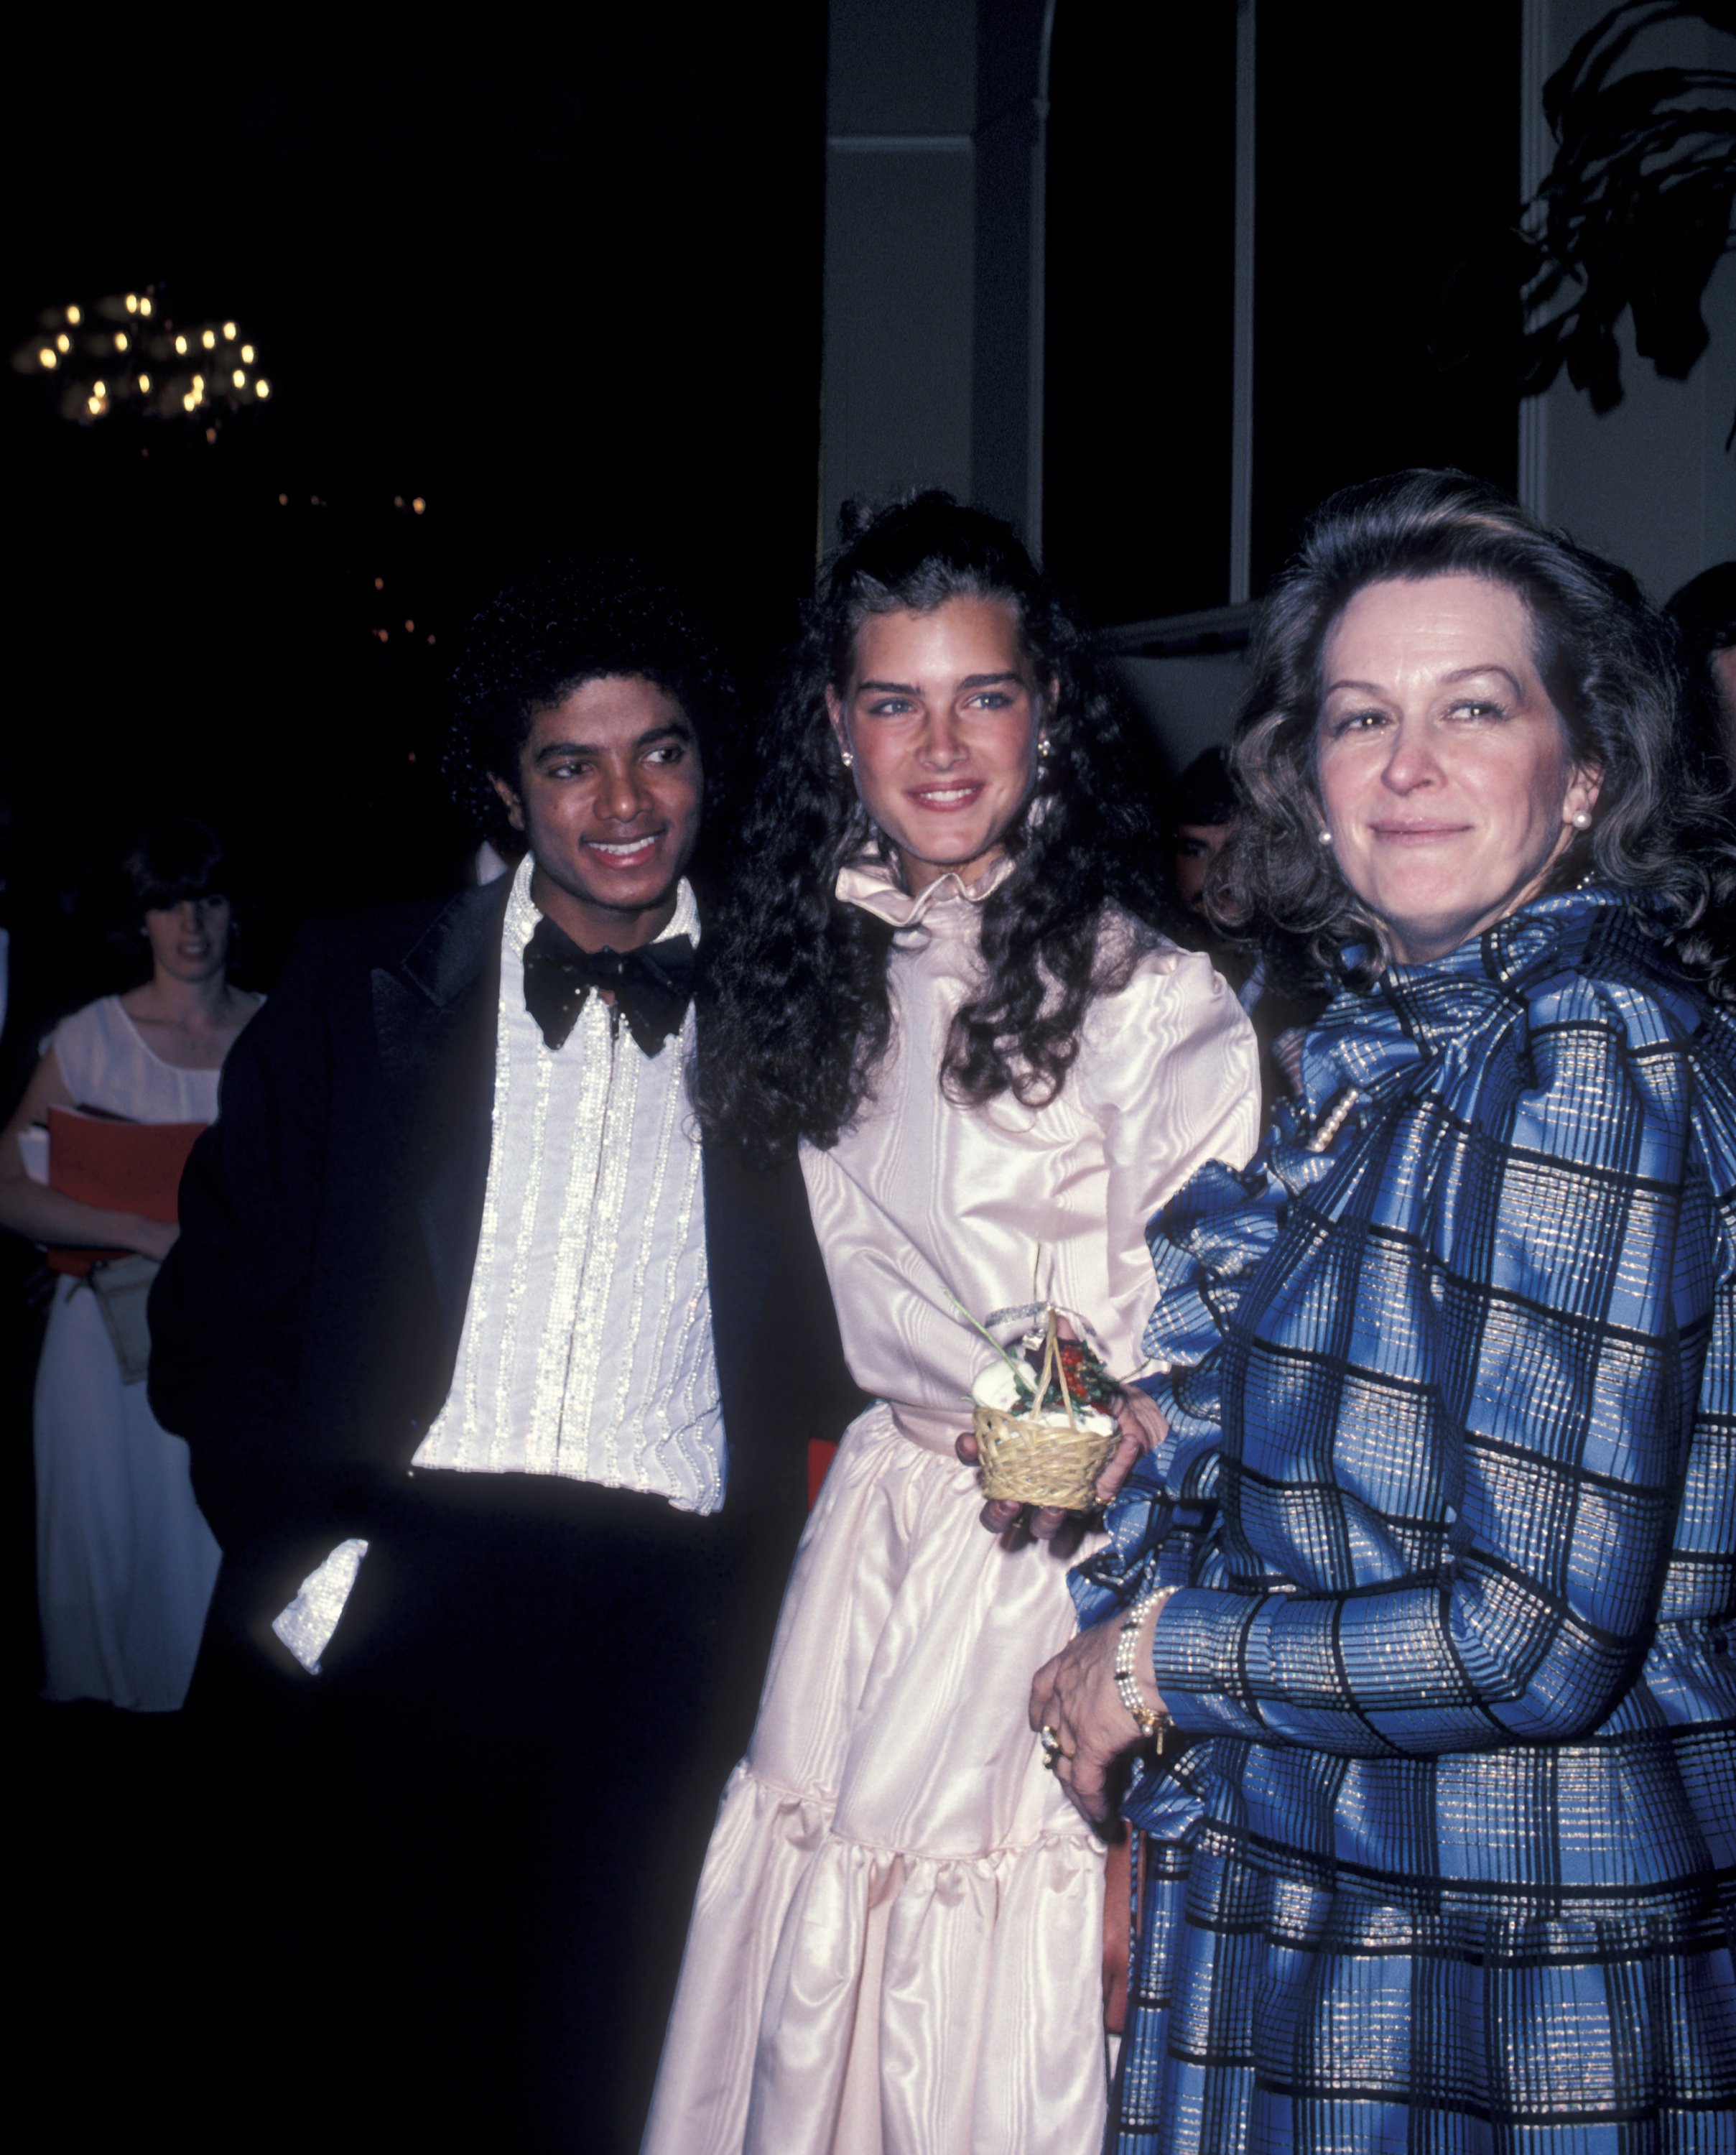 Singer Michael Jackson, Brooke Shields and Terri Shields during the 53rd Annual Academy Awards. / Source: Getty Images